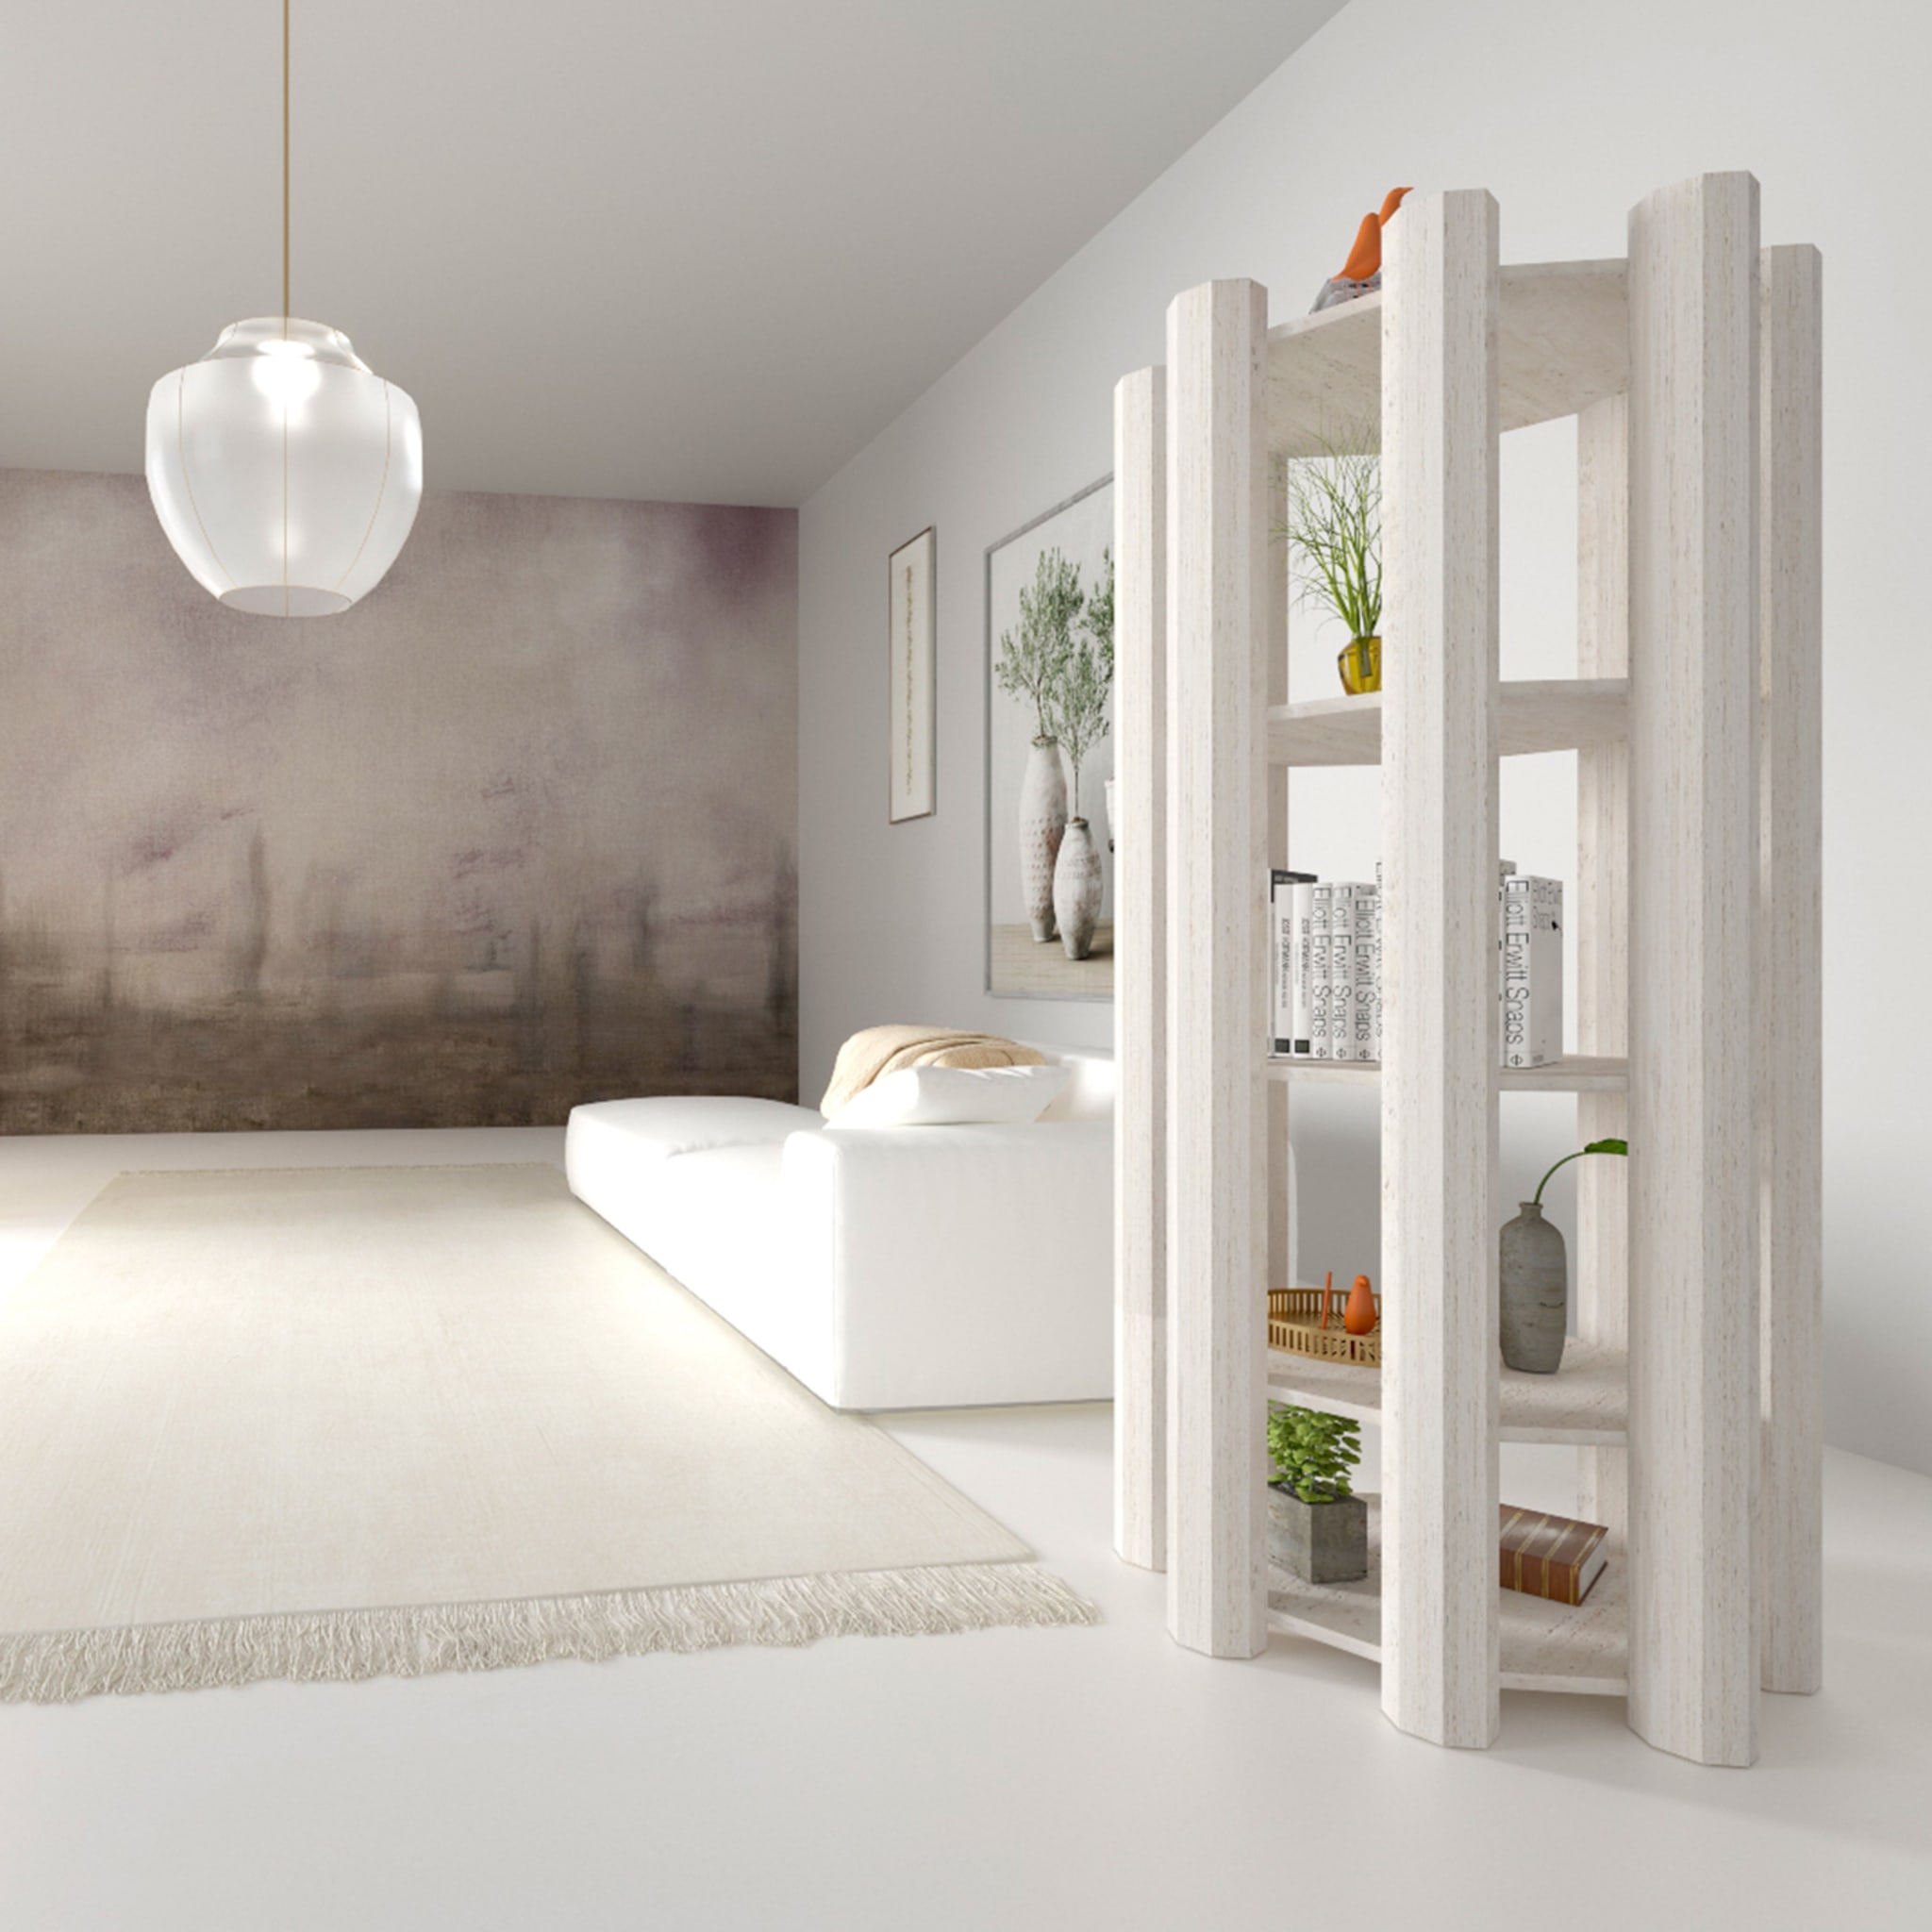 Federico Bookcase in White Marble By Sissy Daniele - Alternative view 3